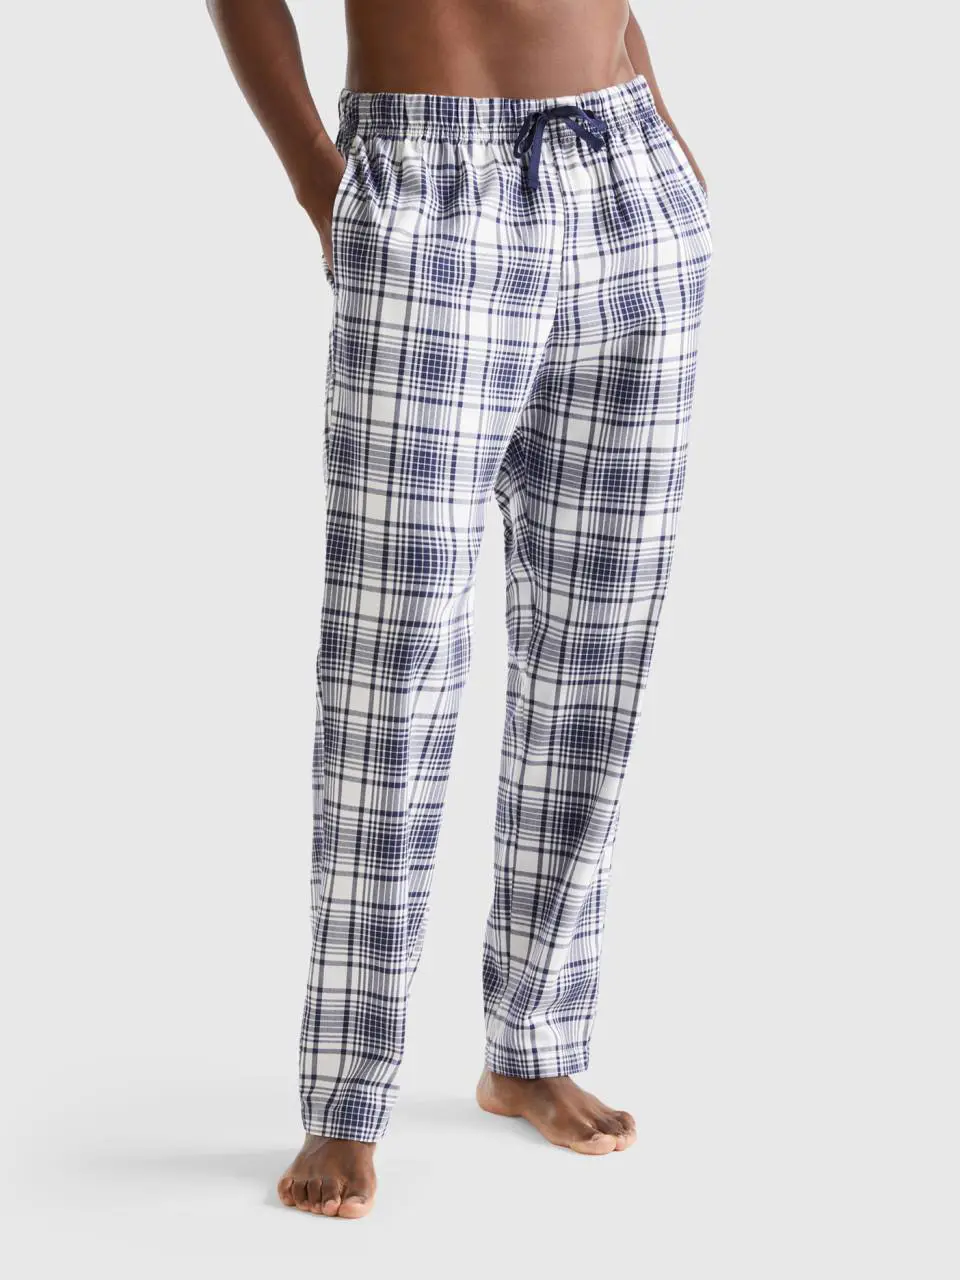 Benetton check trousers. 1